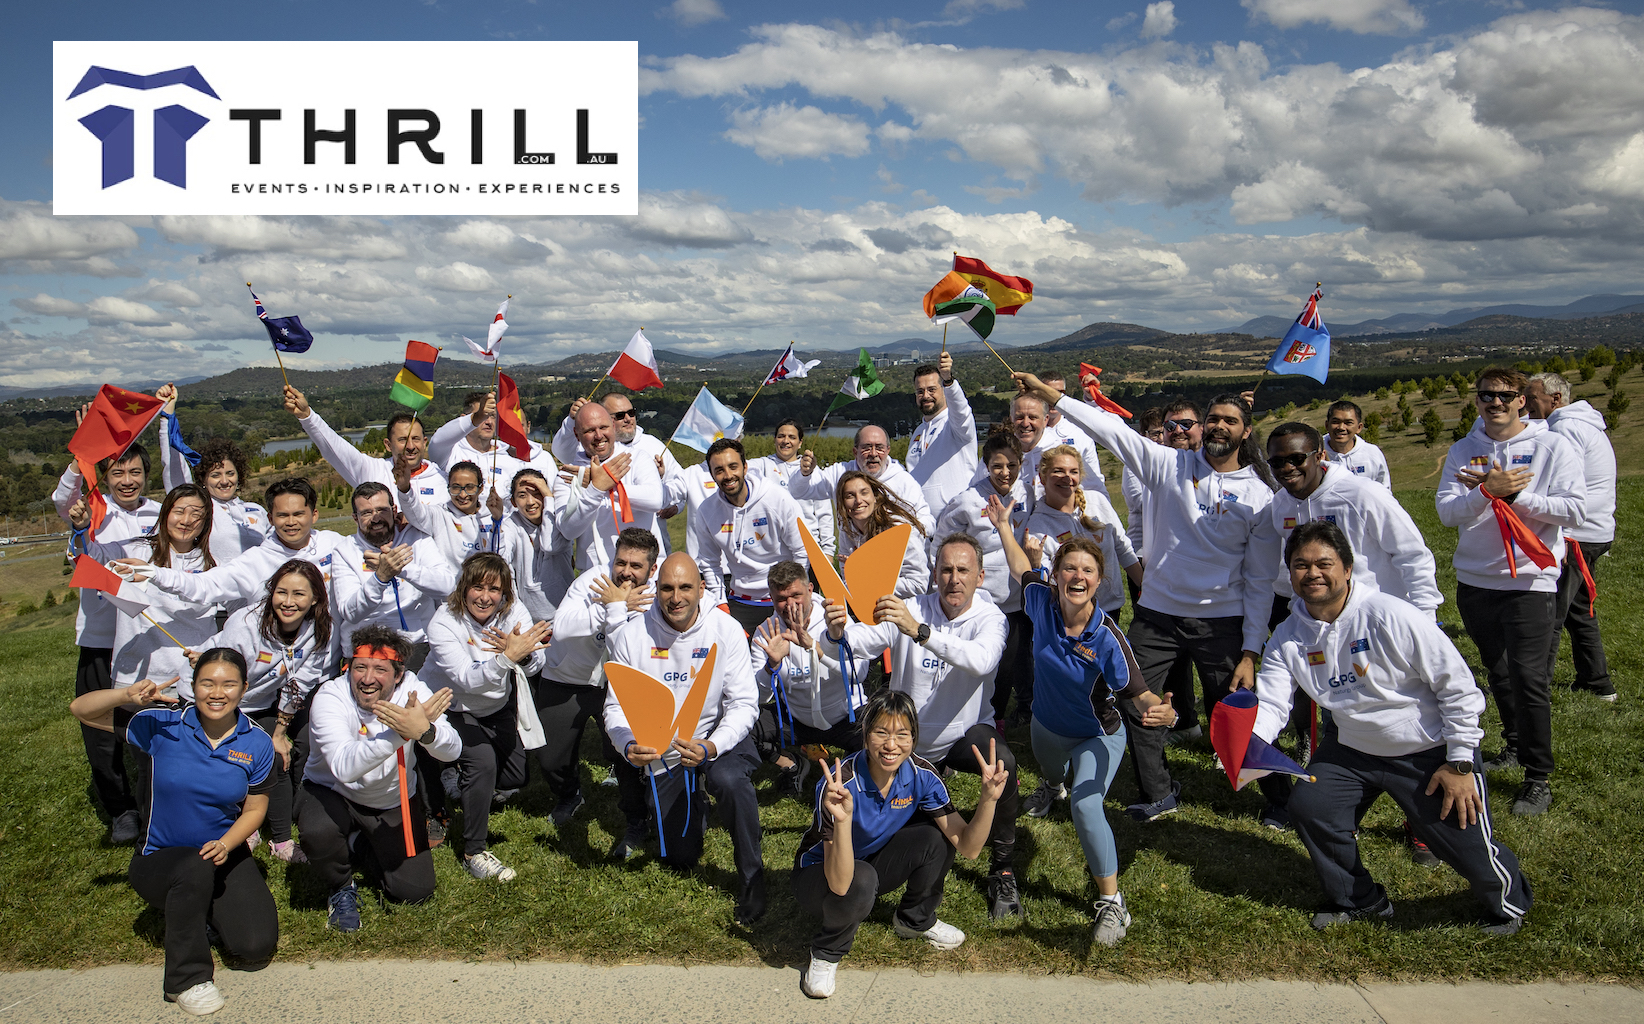 Team Building Thrill events at all conference venues, highlands, mountains and The Arboretum